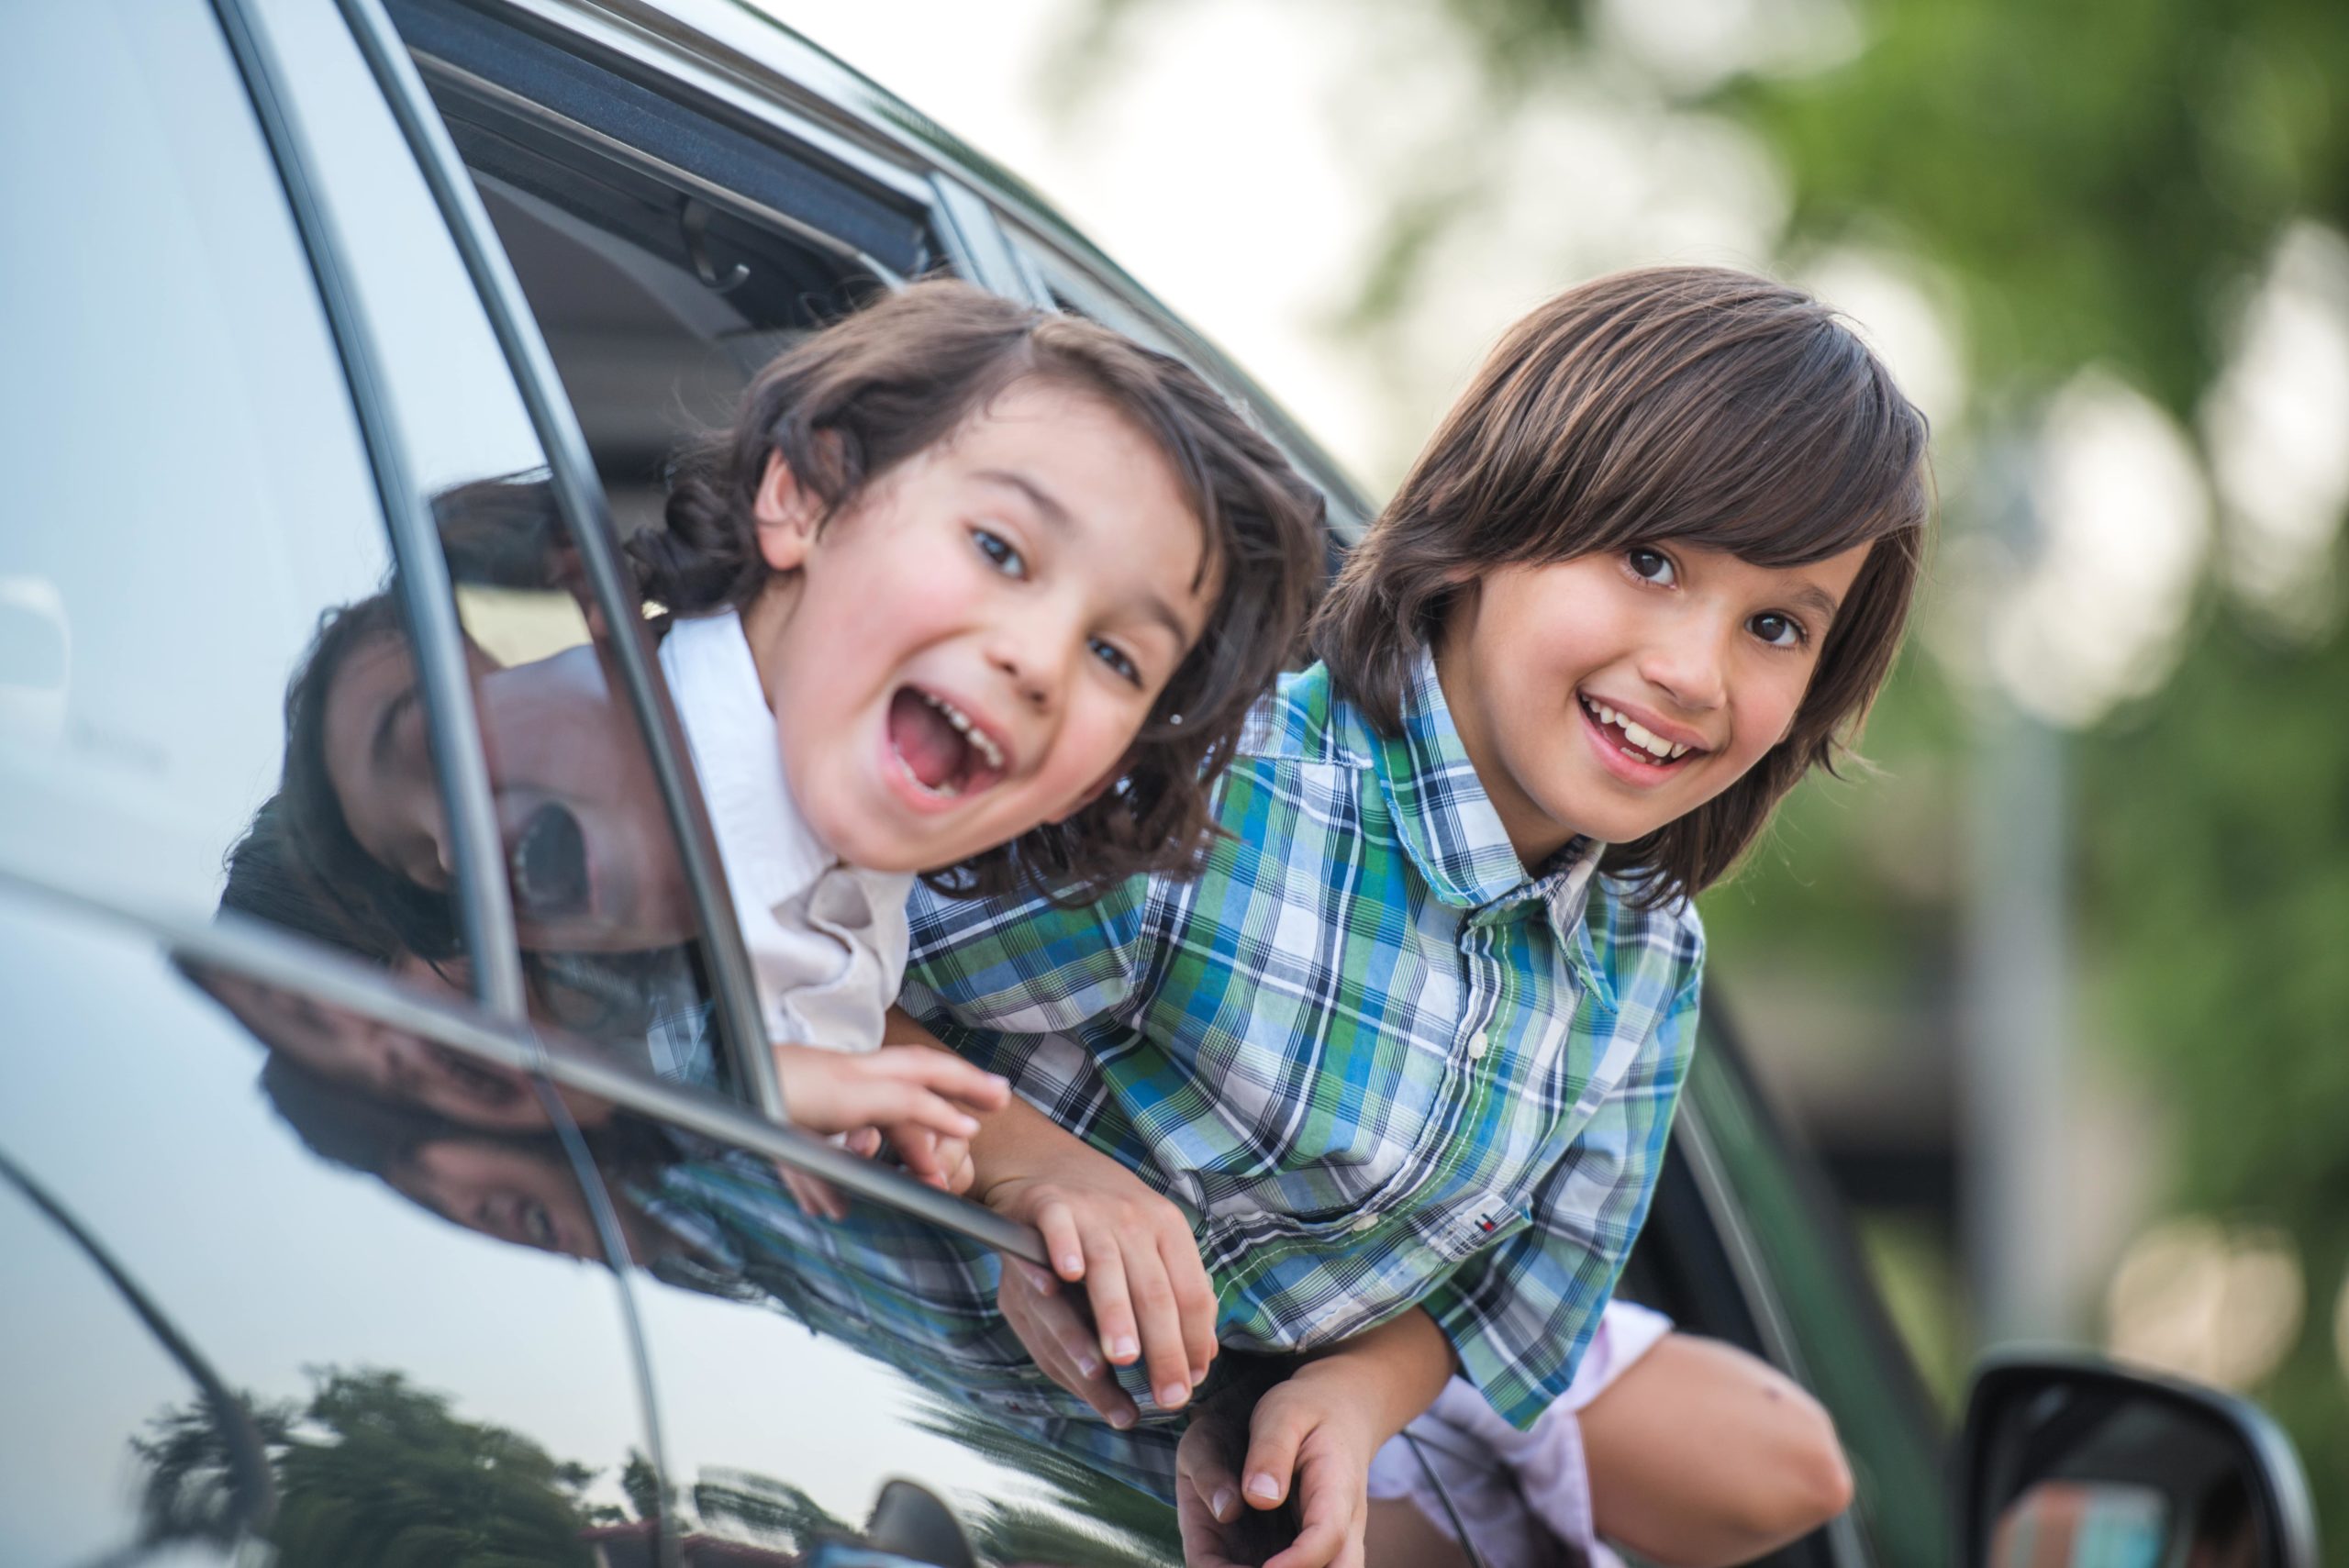 Two kids leaning out of a car window